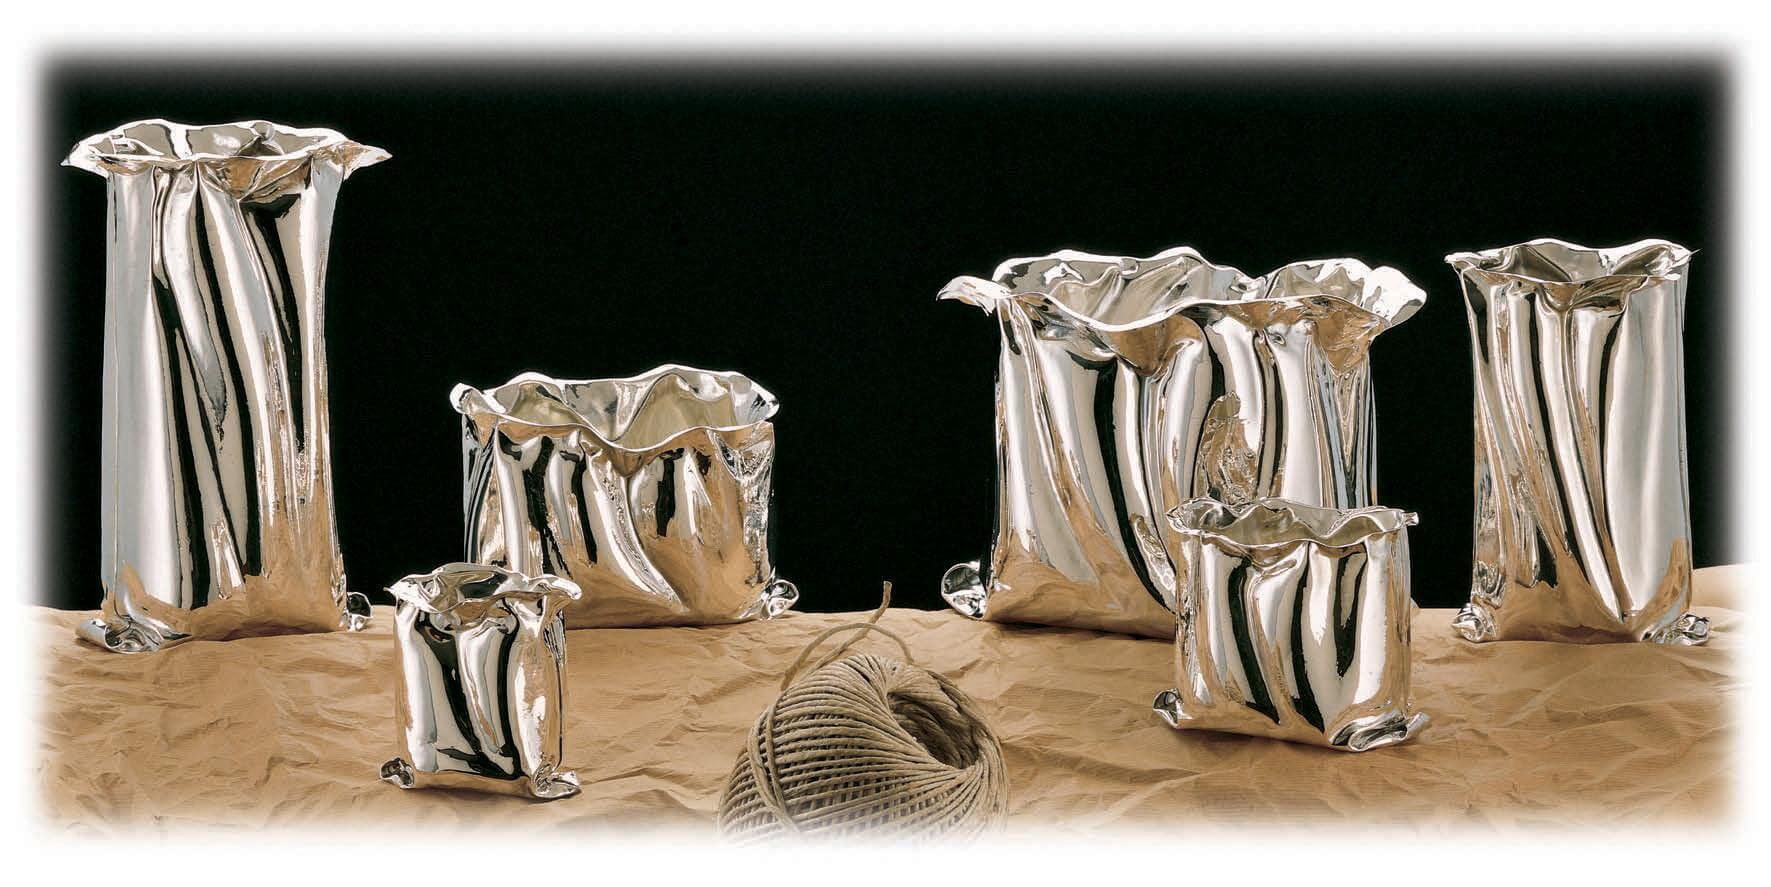 Sterling Silver Bag of Nuts F - Piece By Zion Hadad